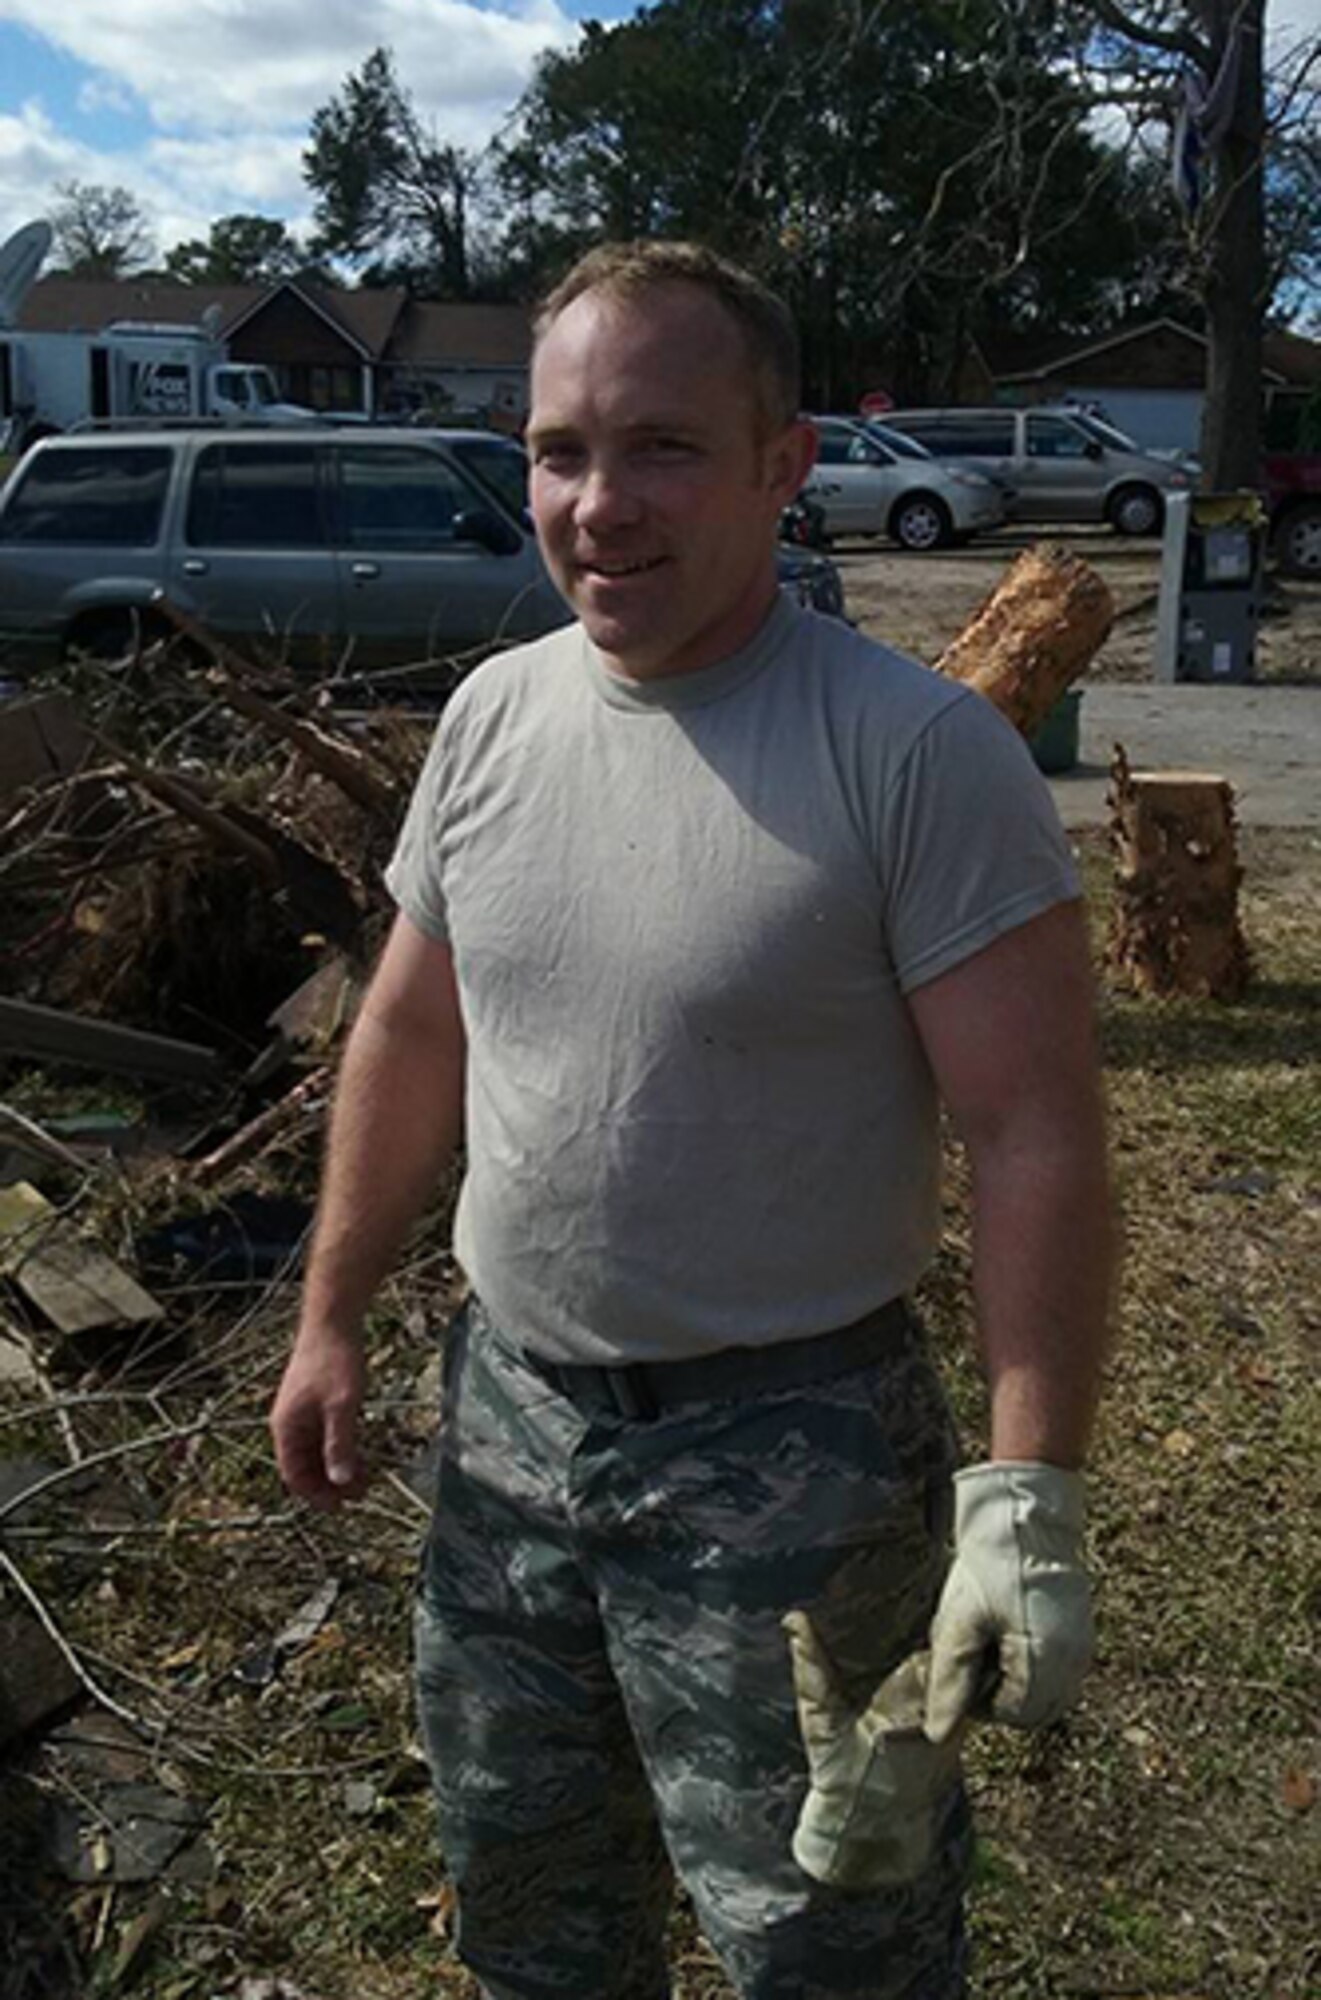 This image of Timothy Thoner and the corresponding story posted to Facebook by a Pensacola family promptly went viral in late February. It was posted as a thank you and recognition to Thoner who helped the family clean up and recover after a tornado struck their home.  The image and story of his selfless act garnered more than 15,000 likes and 6,500 shares.  (Courtesy photo)